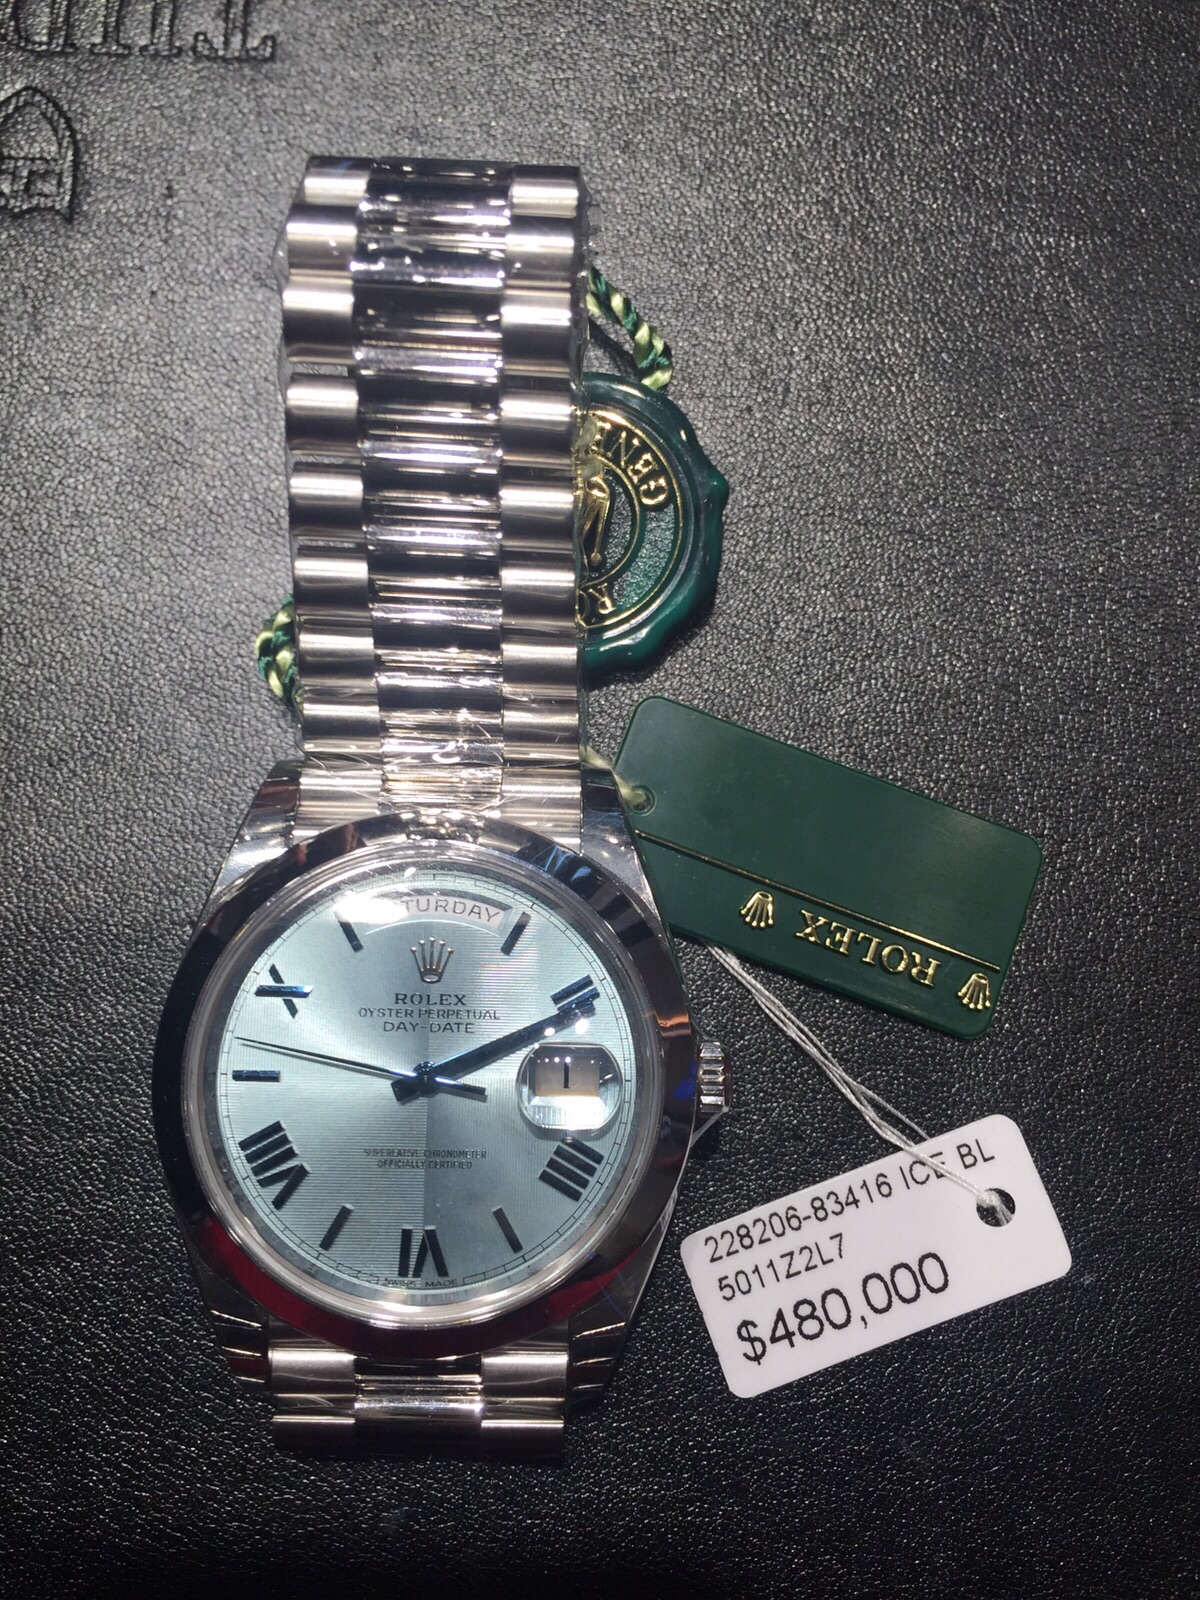 Basel World Rolex Watches appear in Hong Kong Today 12 July 2015